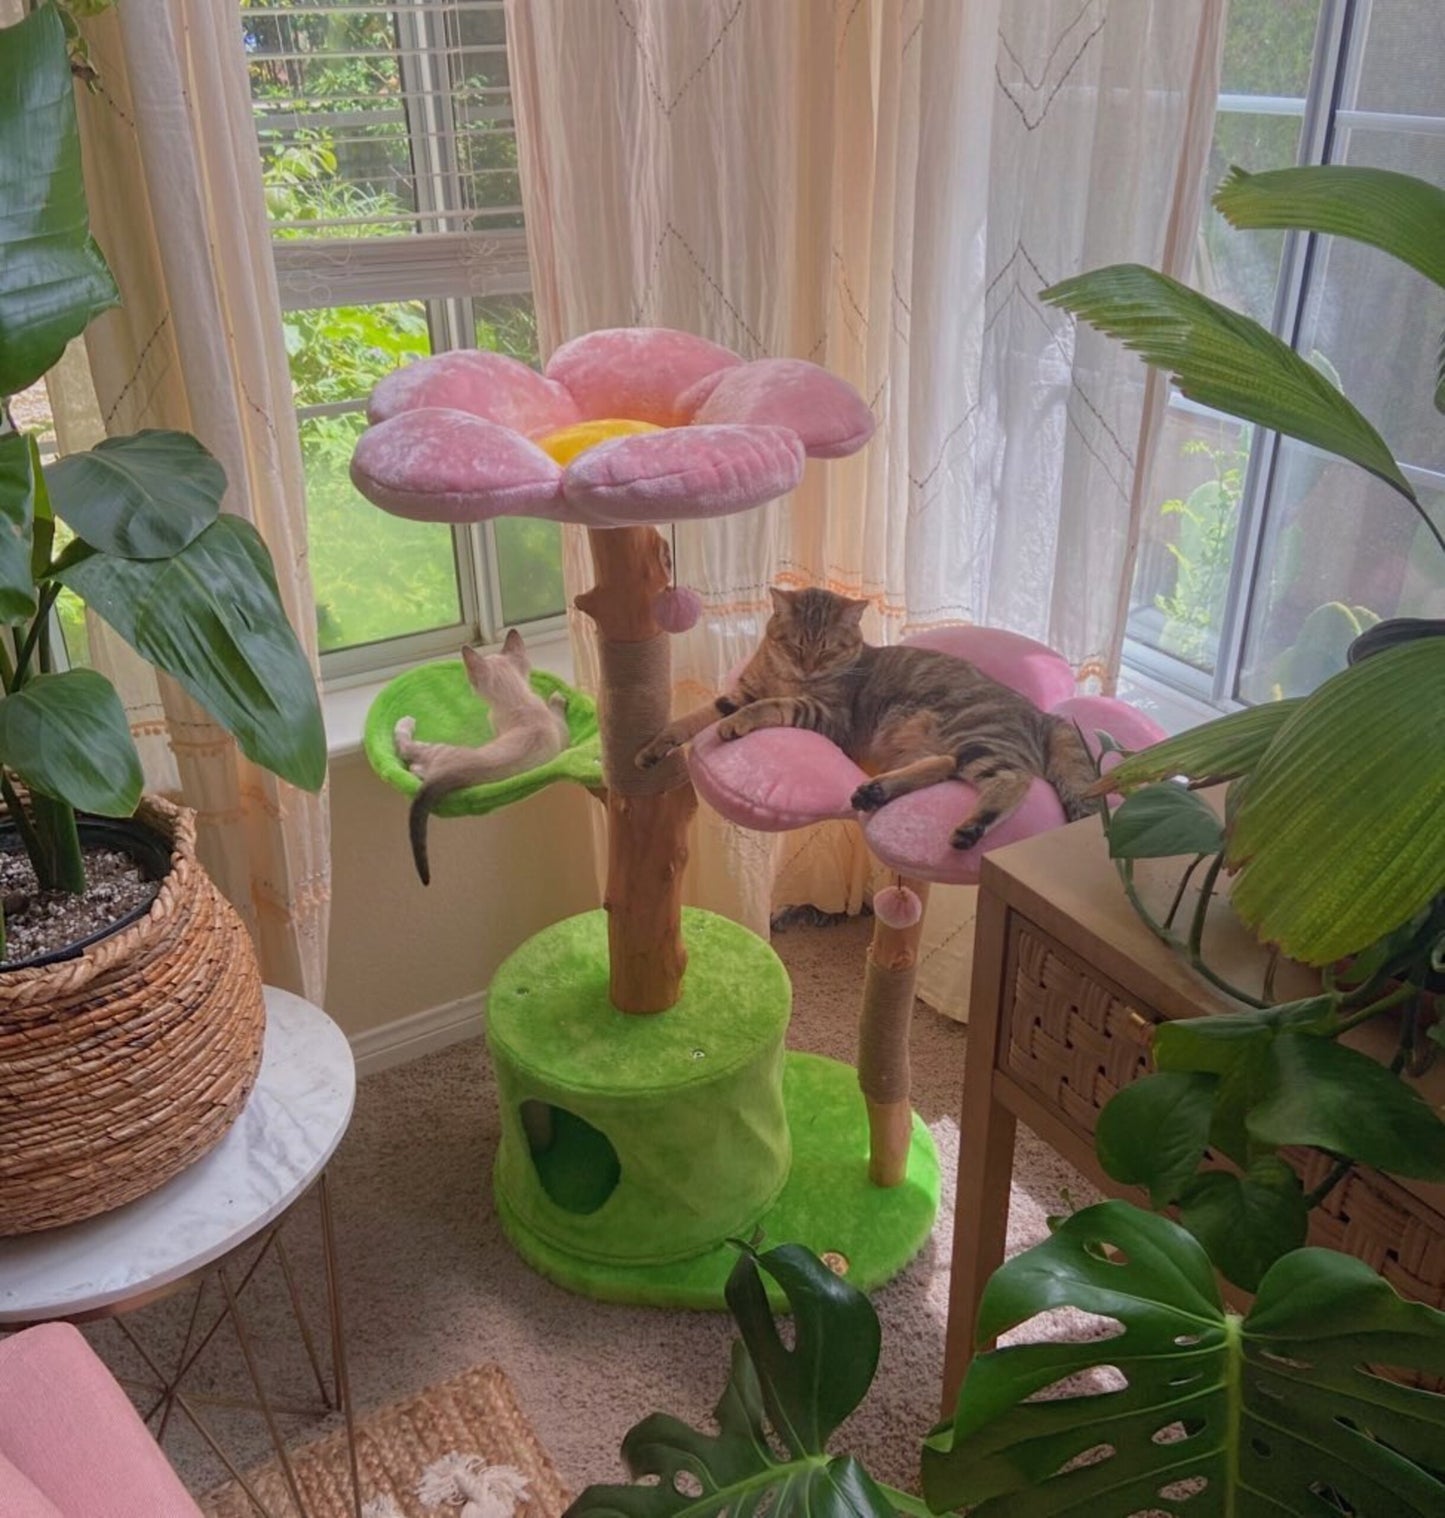 A cat sitting on a cherry blossom cat tree in a room